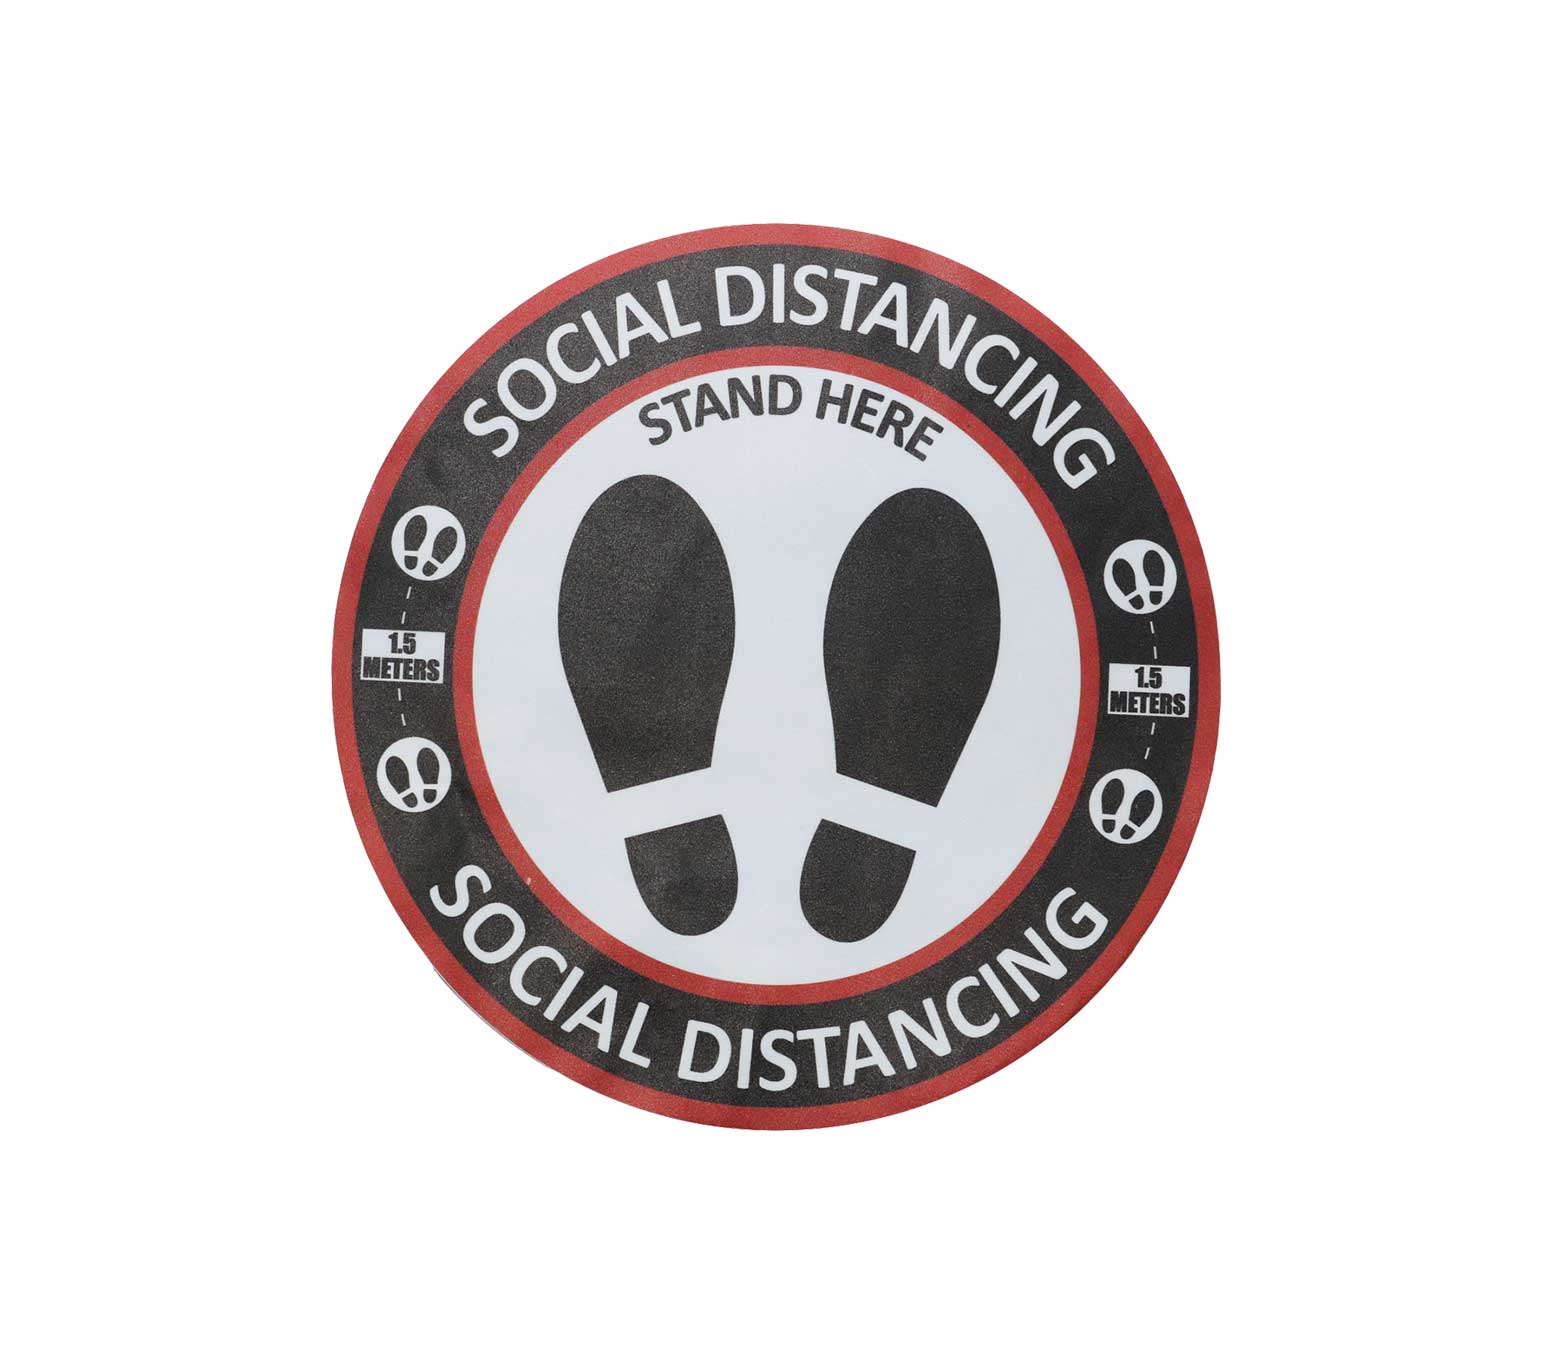 Social Distancing Signage (Round Floor Decal 30cm).